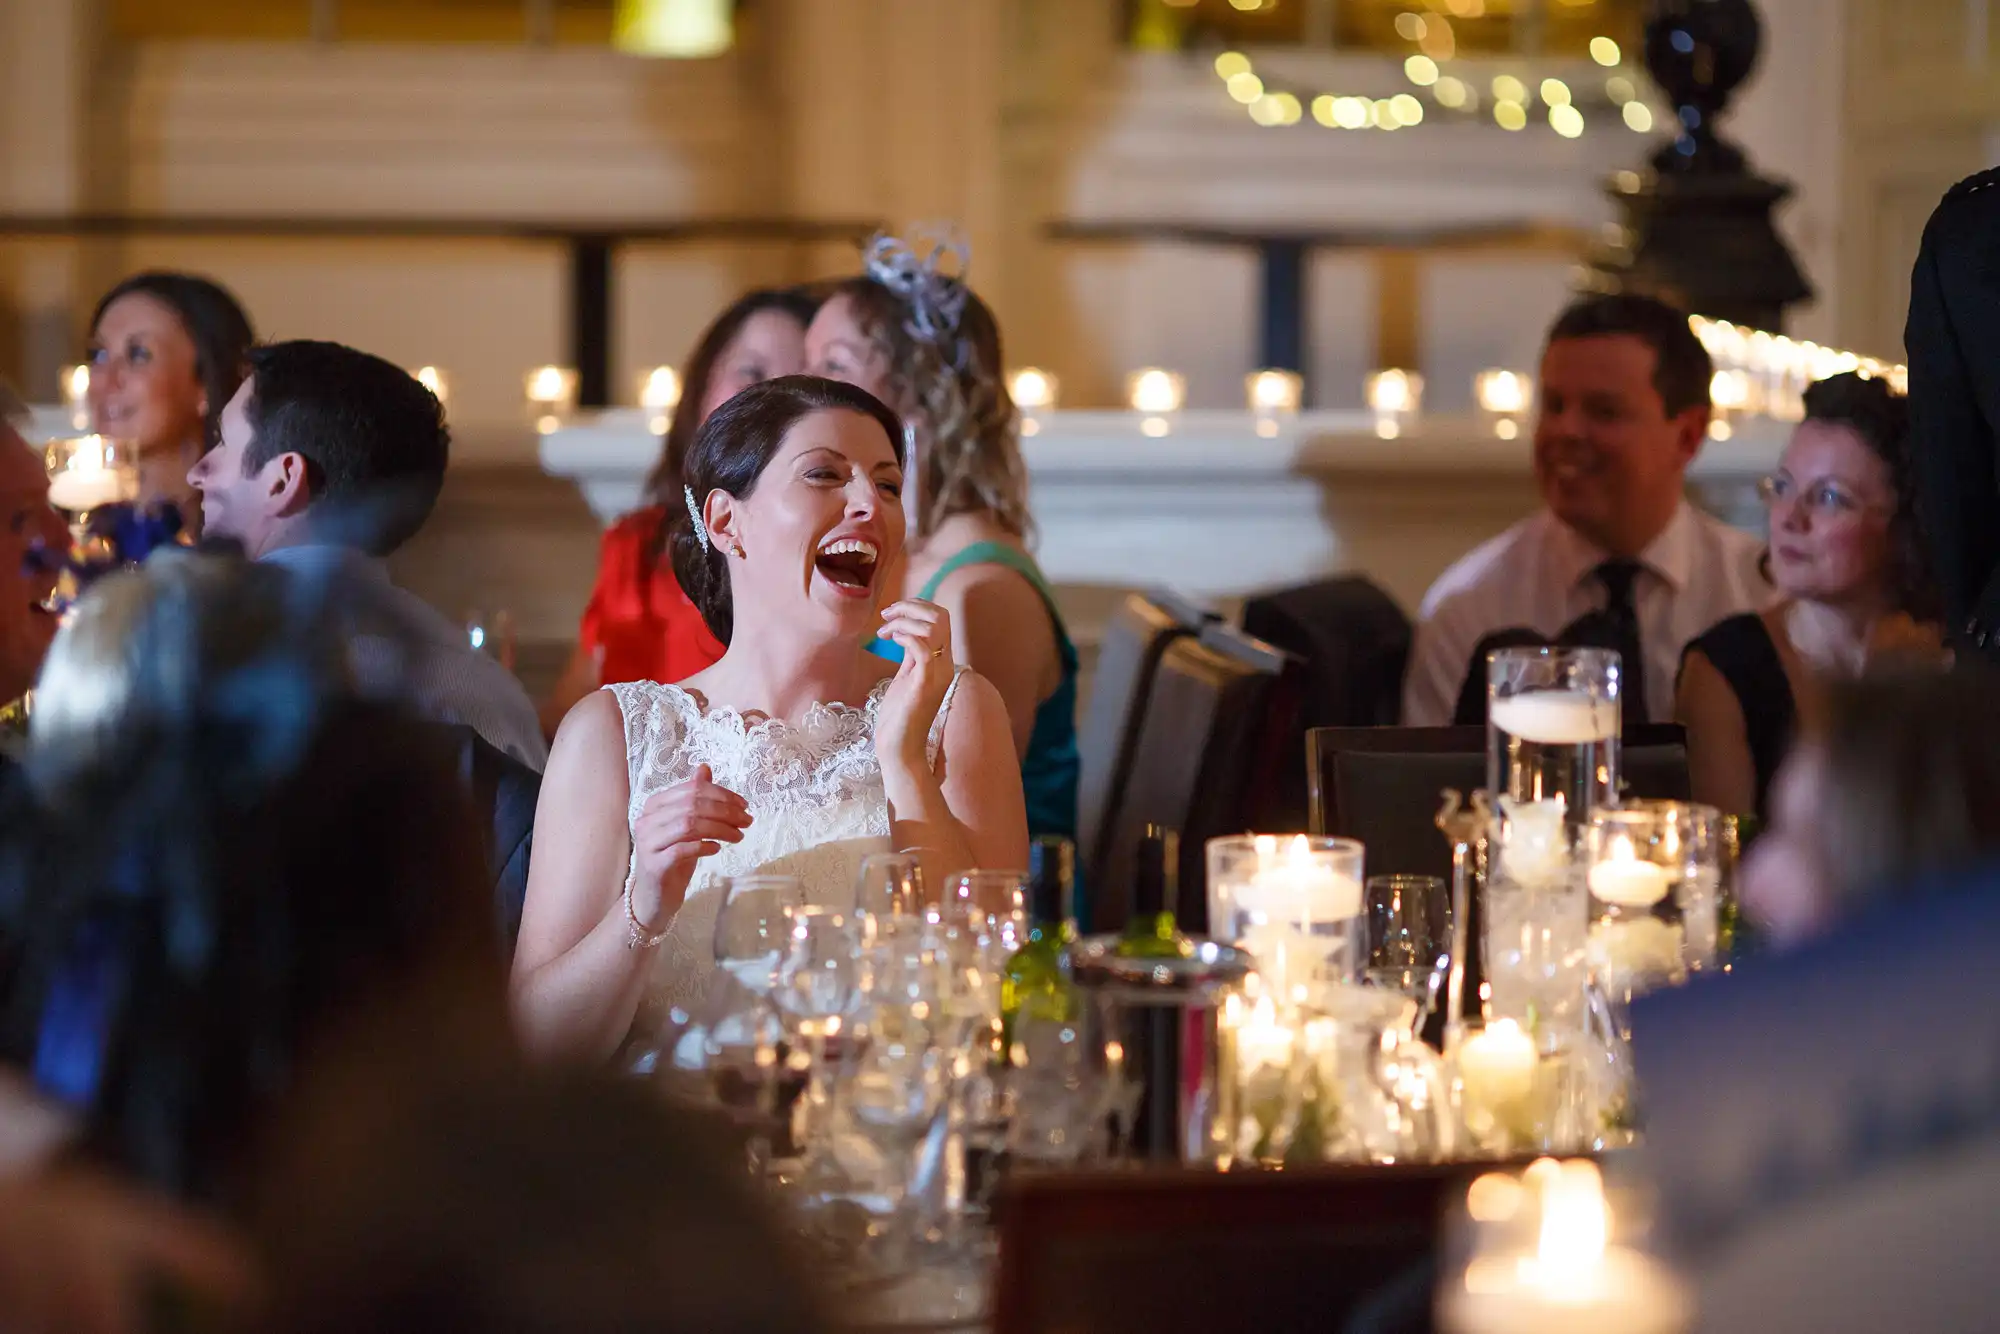 A bride laughing joyfully at a candlelit reception table surrounded by guests.